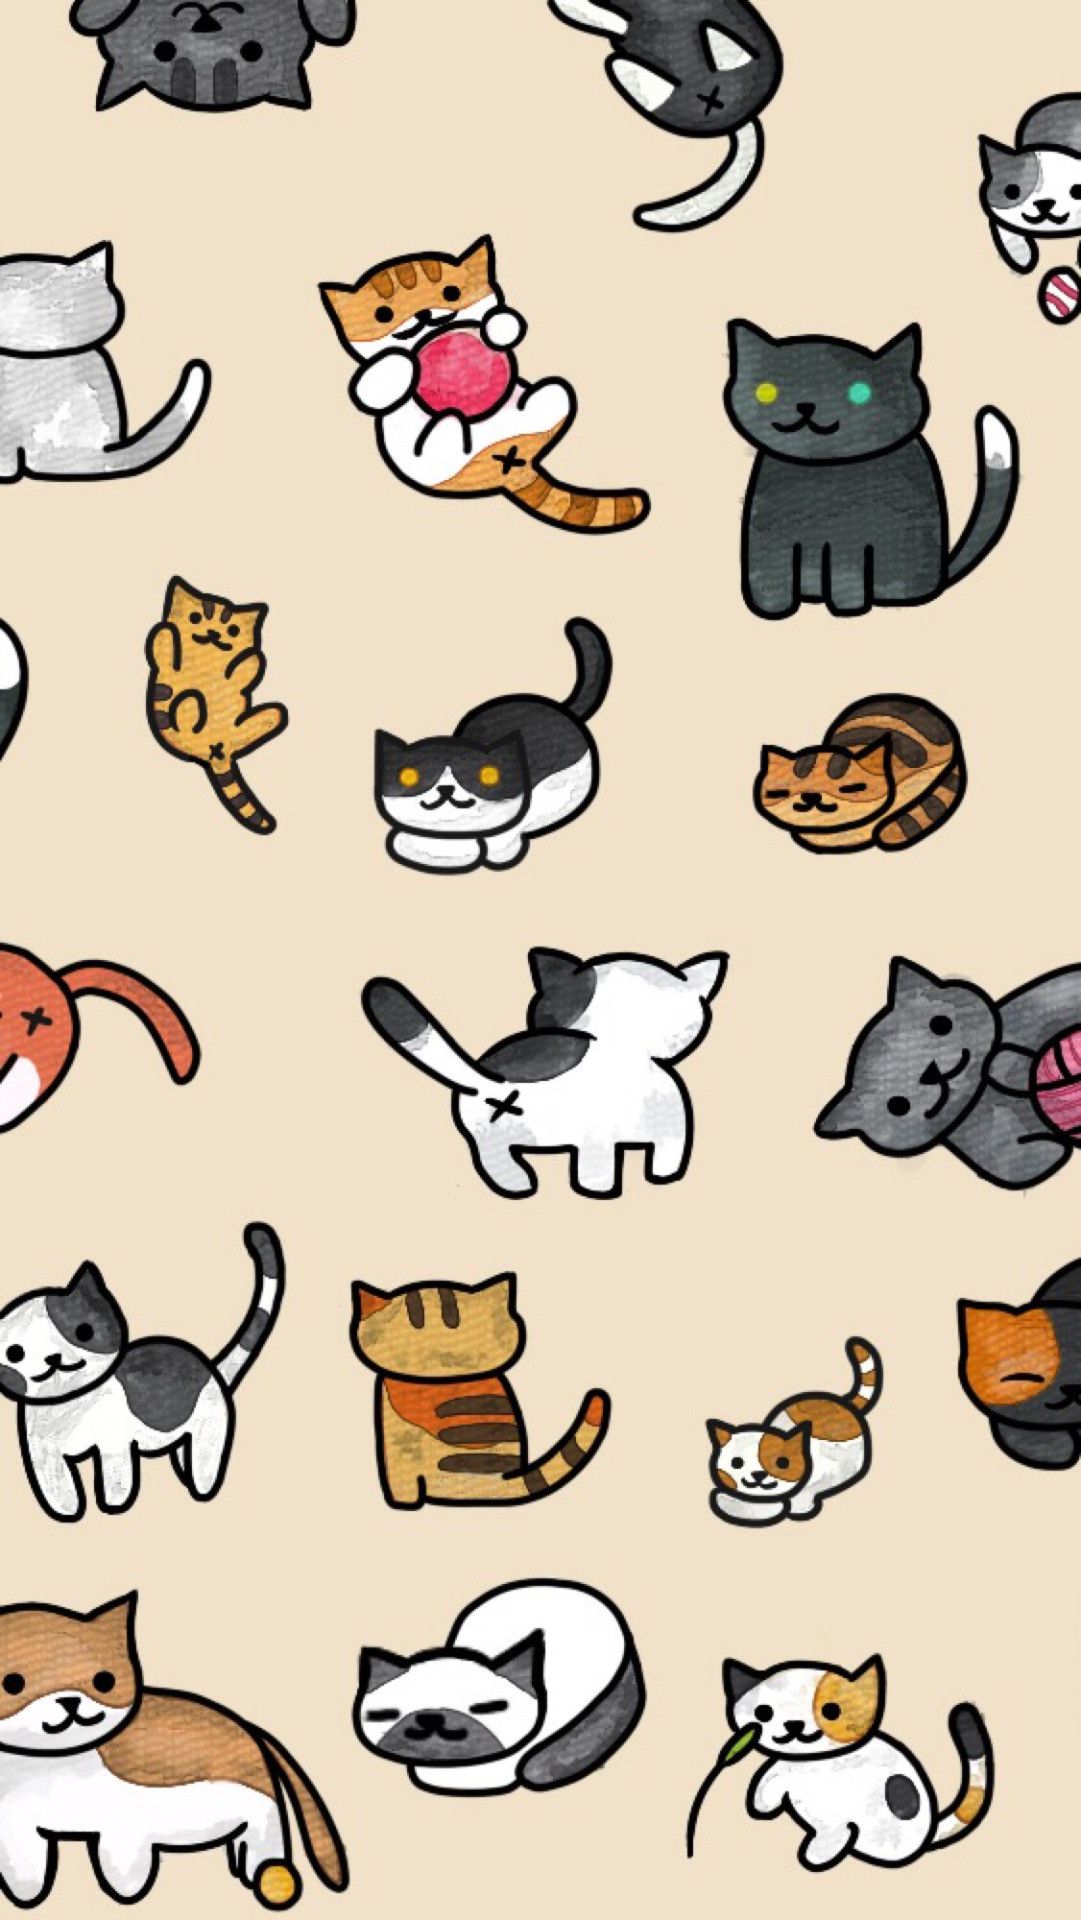 A pattern of cats in different poses - Pusheen